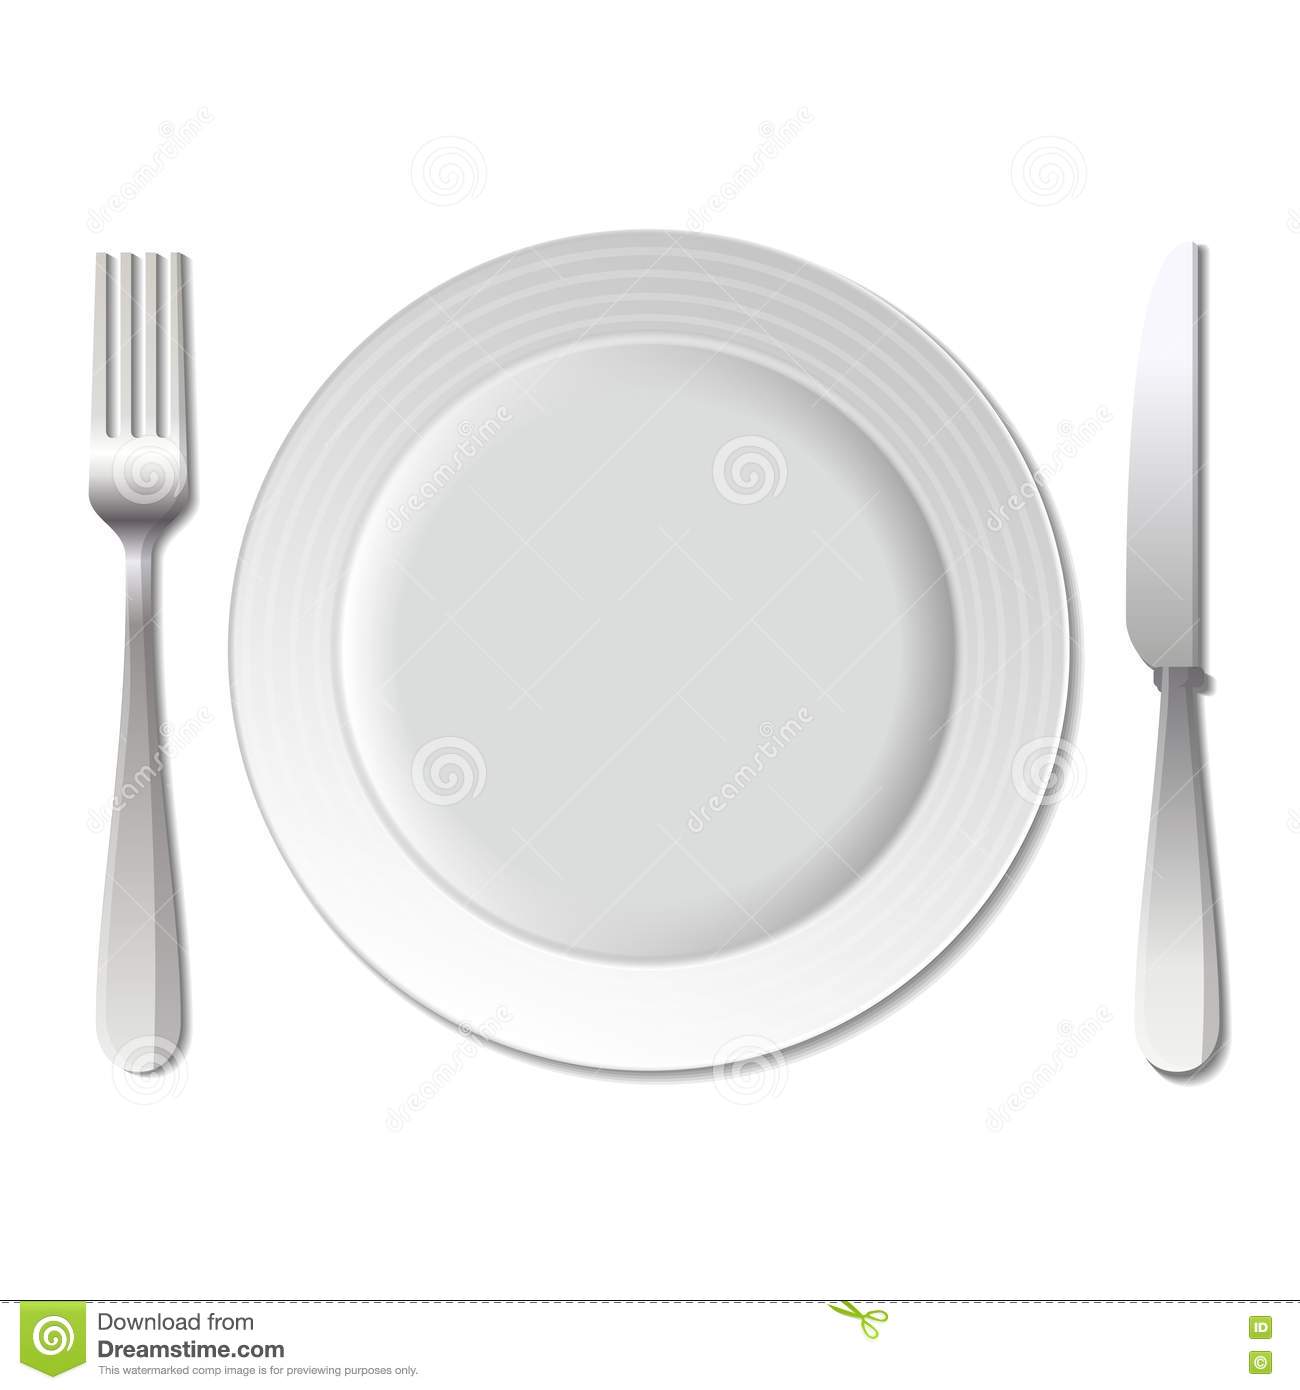 Dinner Plate Knife And Fork  Vector  Stock Image   Image  38717351